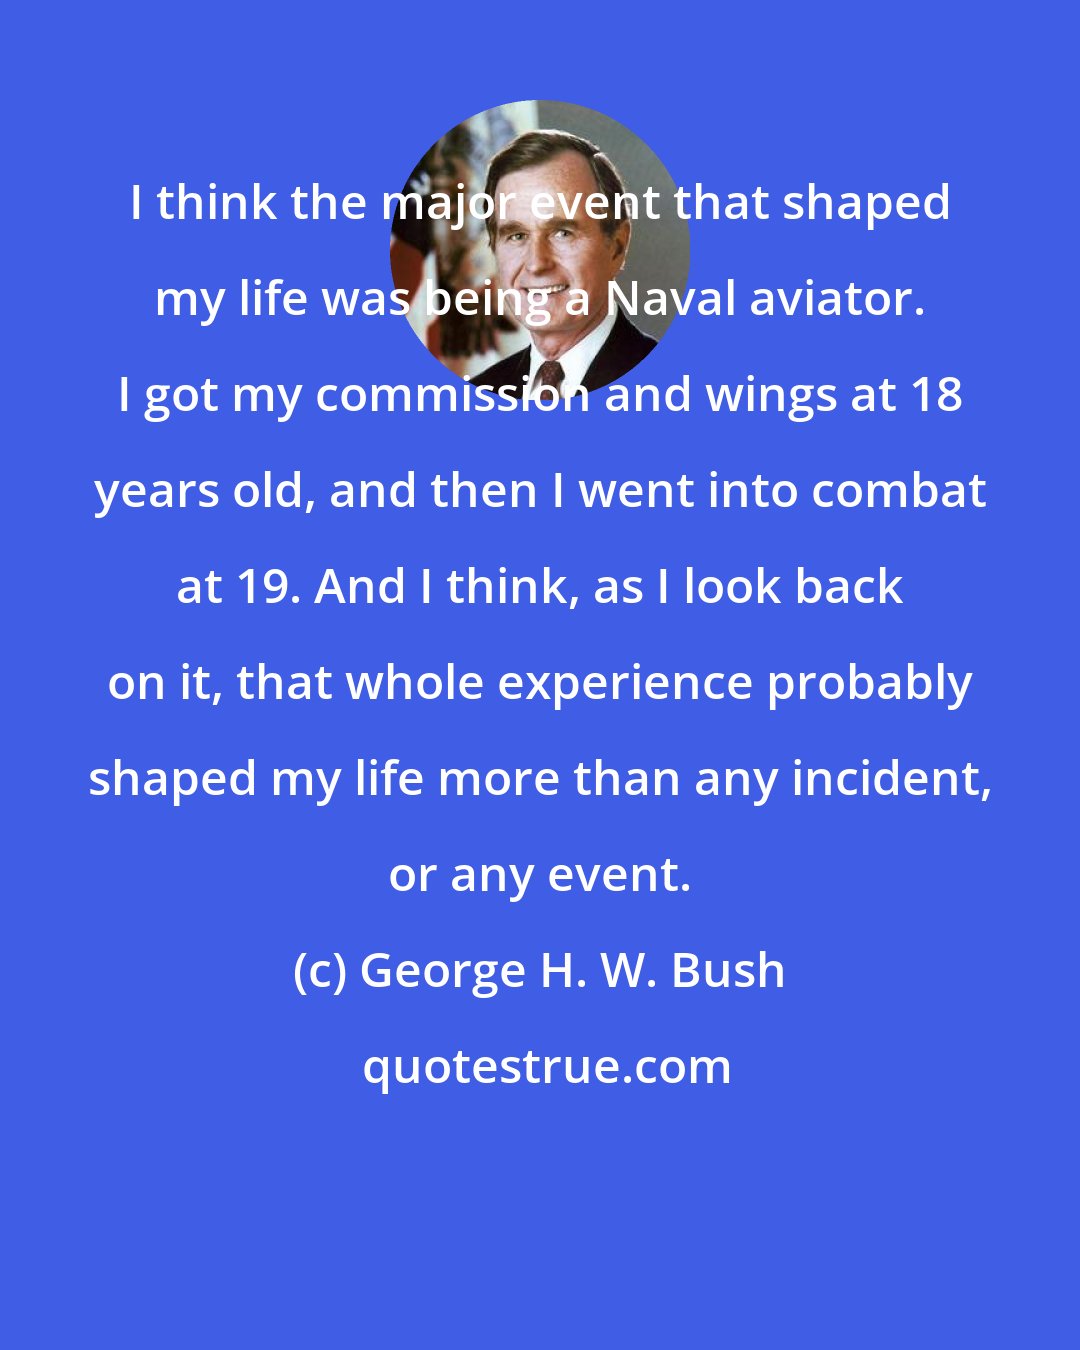 George H. W. Bush: I think the major event that shaped my life was being a Naval aviator. I got my commission and wings at 18 years old, and then I went into combat at 19. And I think, as I look back on it, that whole experience probably shaped my life more than any incident, or any event.